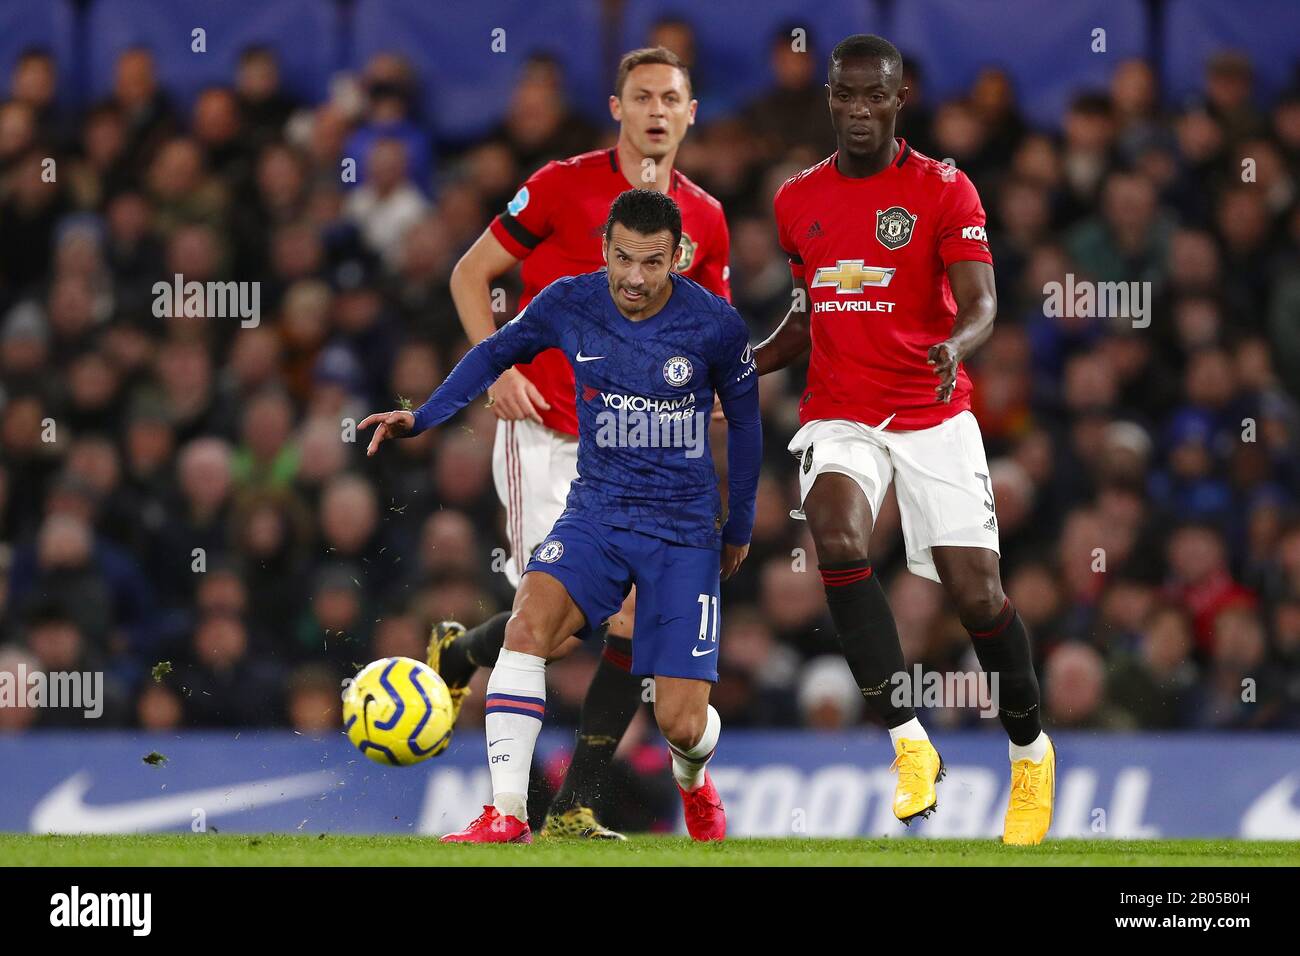 Pedro of Chelsea in action with Nemanja Matic (L) and Eric Bailly (R) of Manchester United - Chelsea v Manchester United, Premier League, Stamford Bridge, London, UK - 17th February 2020  Editorial Use Only - DataCo restrictions apply Stock Photo